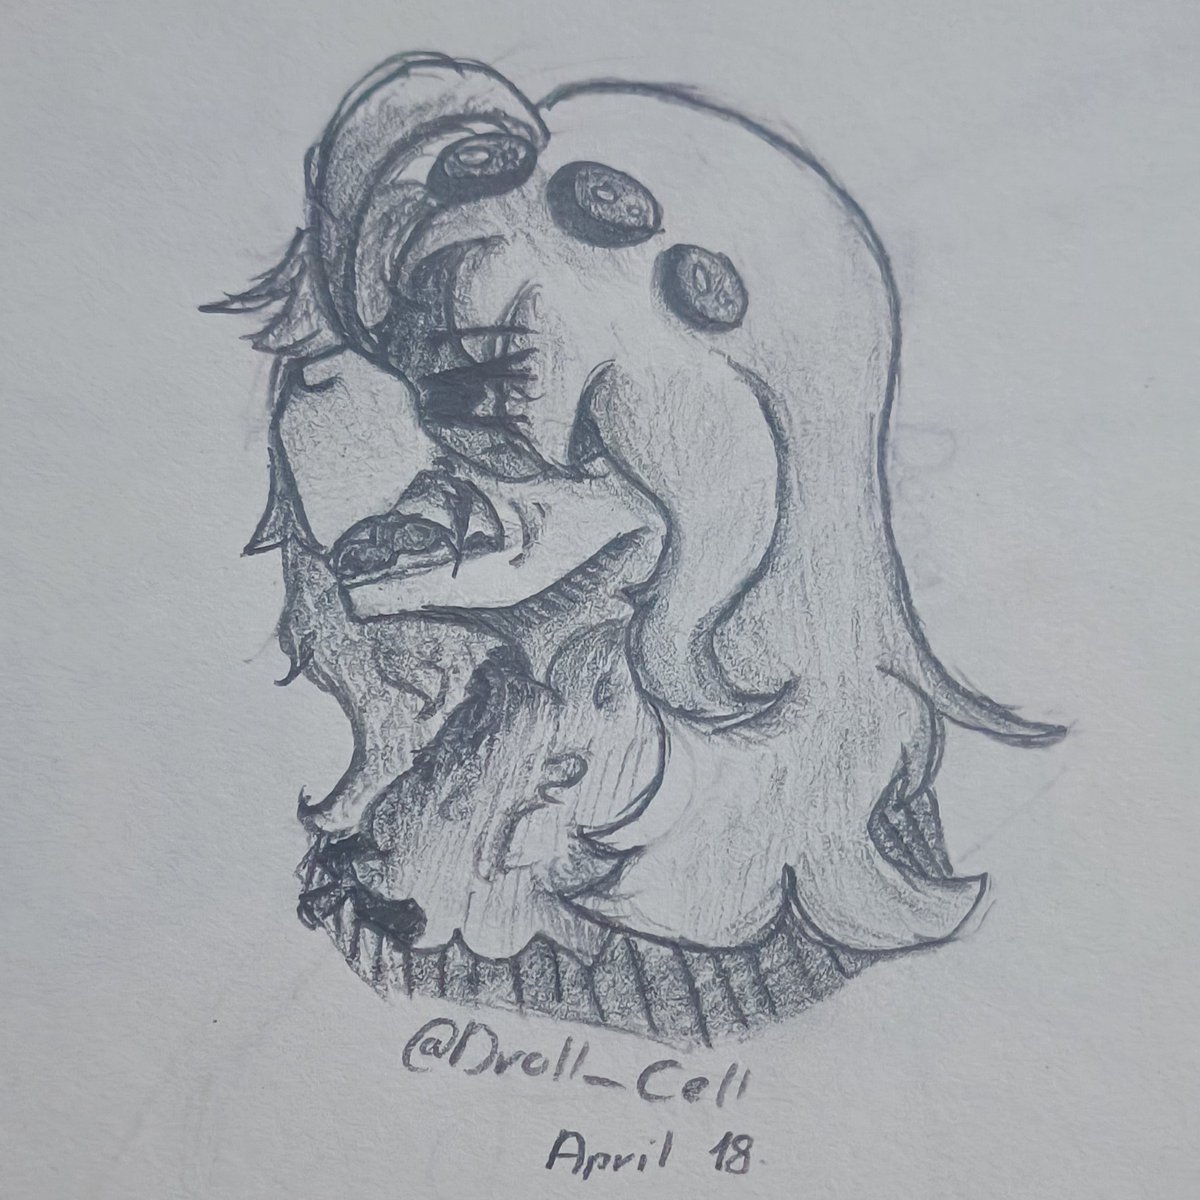 I was bored in singing class, so I drew  Dona (again lol) 

I will not digitize this one drawing (⁠◕⁠ᴗ⁠◕⁠✿⁠)

#murderdrones
#art 
#oc
#murderdronesocart